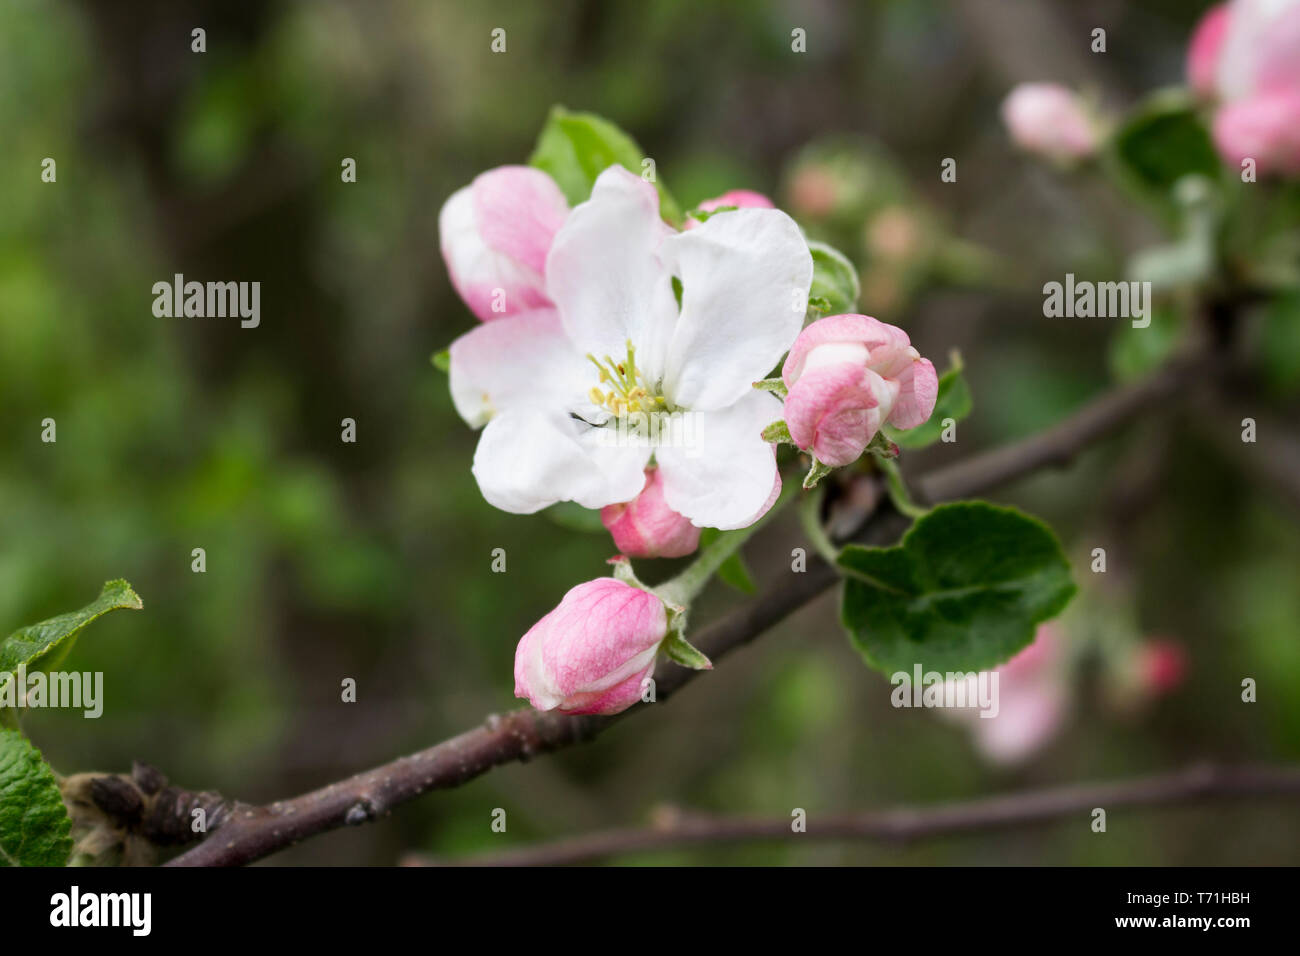 Beautiful spring flower. Apple blossom. Branch of the tree with flowers. Flowering trees. Apple. Garden. Stock Photo